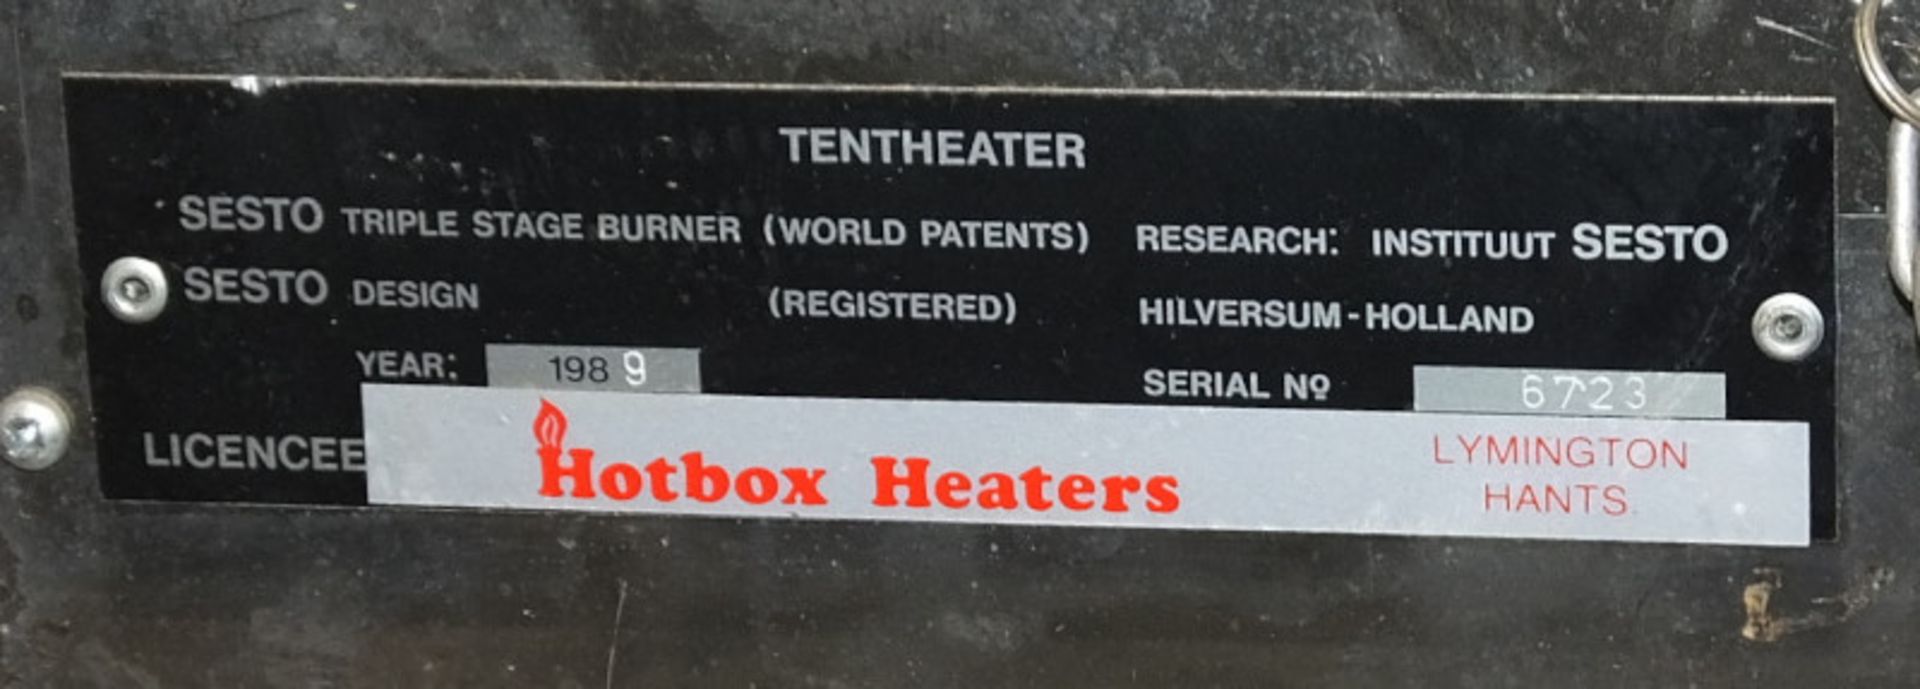 HotBox Heaters Tent Heater GHS III - NSN 4520-99-130-6045 Output - 5-15kW, Ex-MOD specific - Image 7 of 11